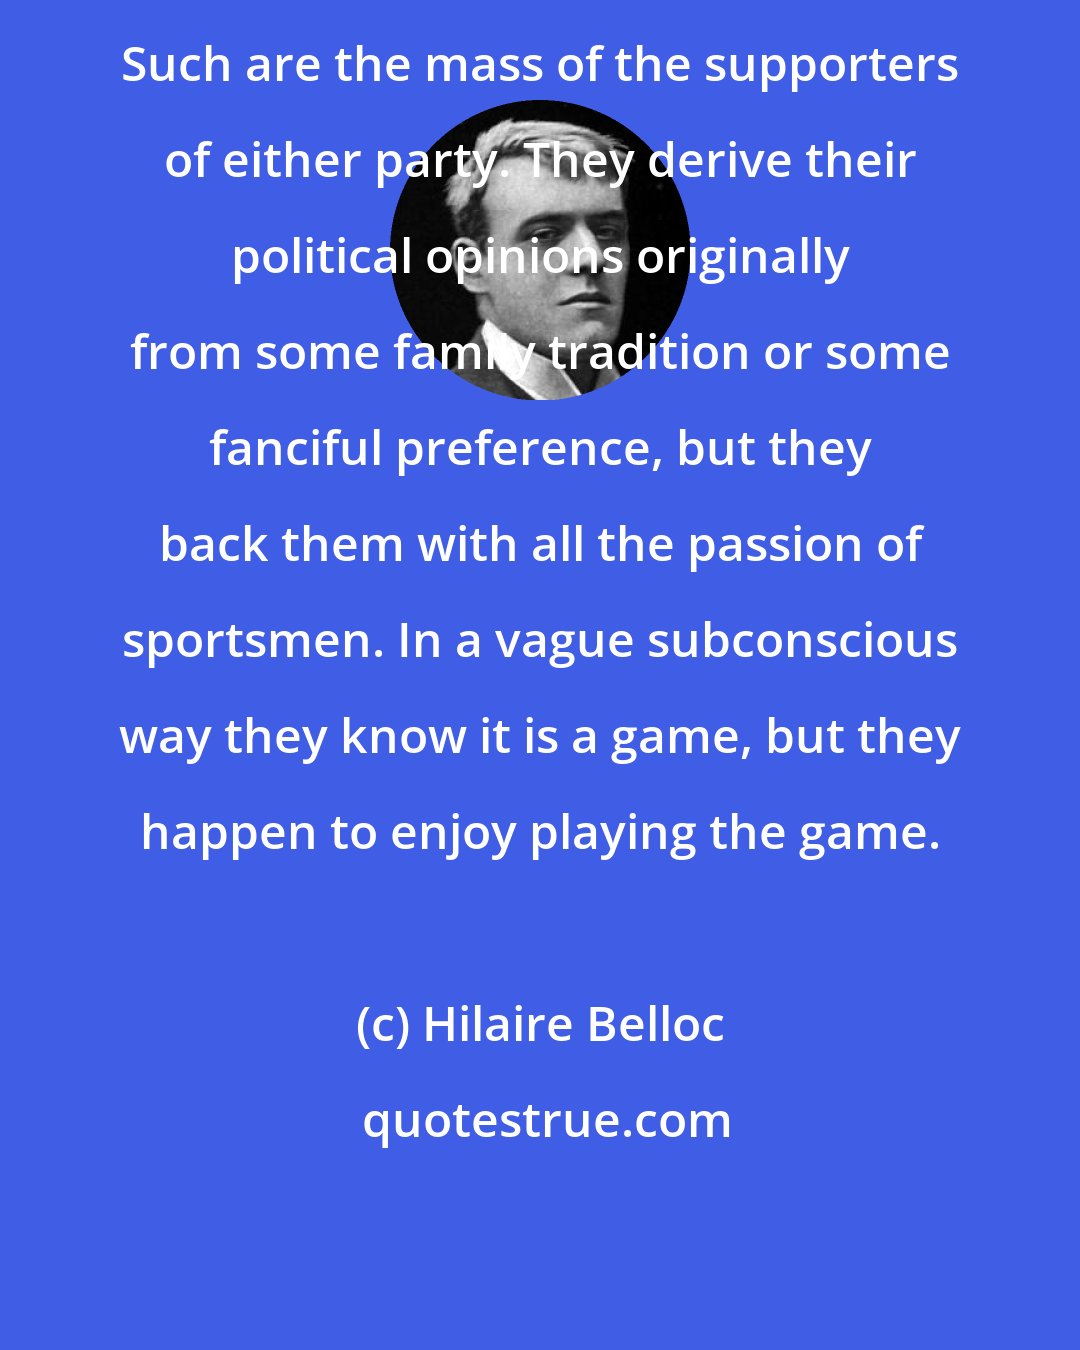 Hilaire Belloc: Such are the mass of the supporters of either party. They derive their political opinions originally from some family tradition or some fanciful preference, but they back them with all the passion of sportsmen. In a vague subconscious way they know it is a game, but they happen to enjoy playing the game.